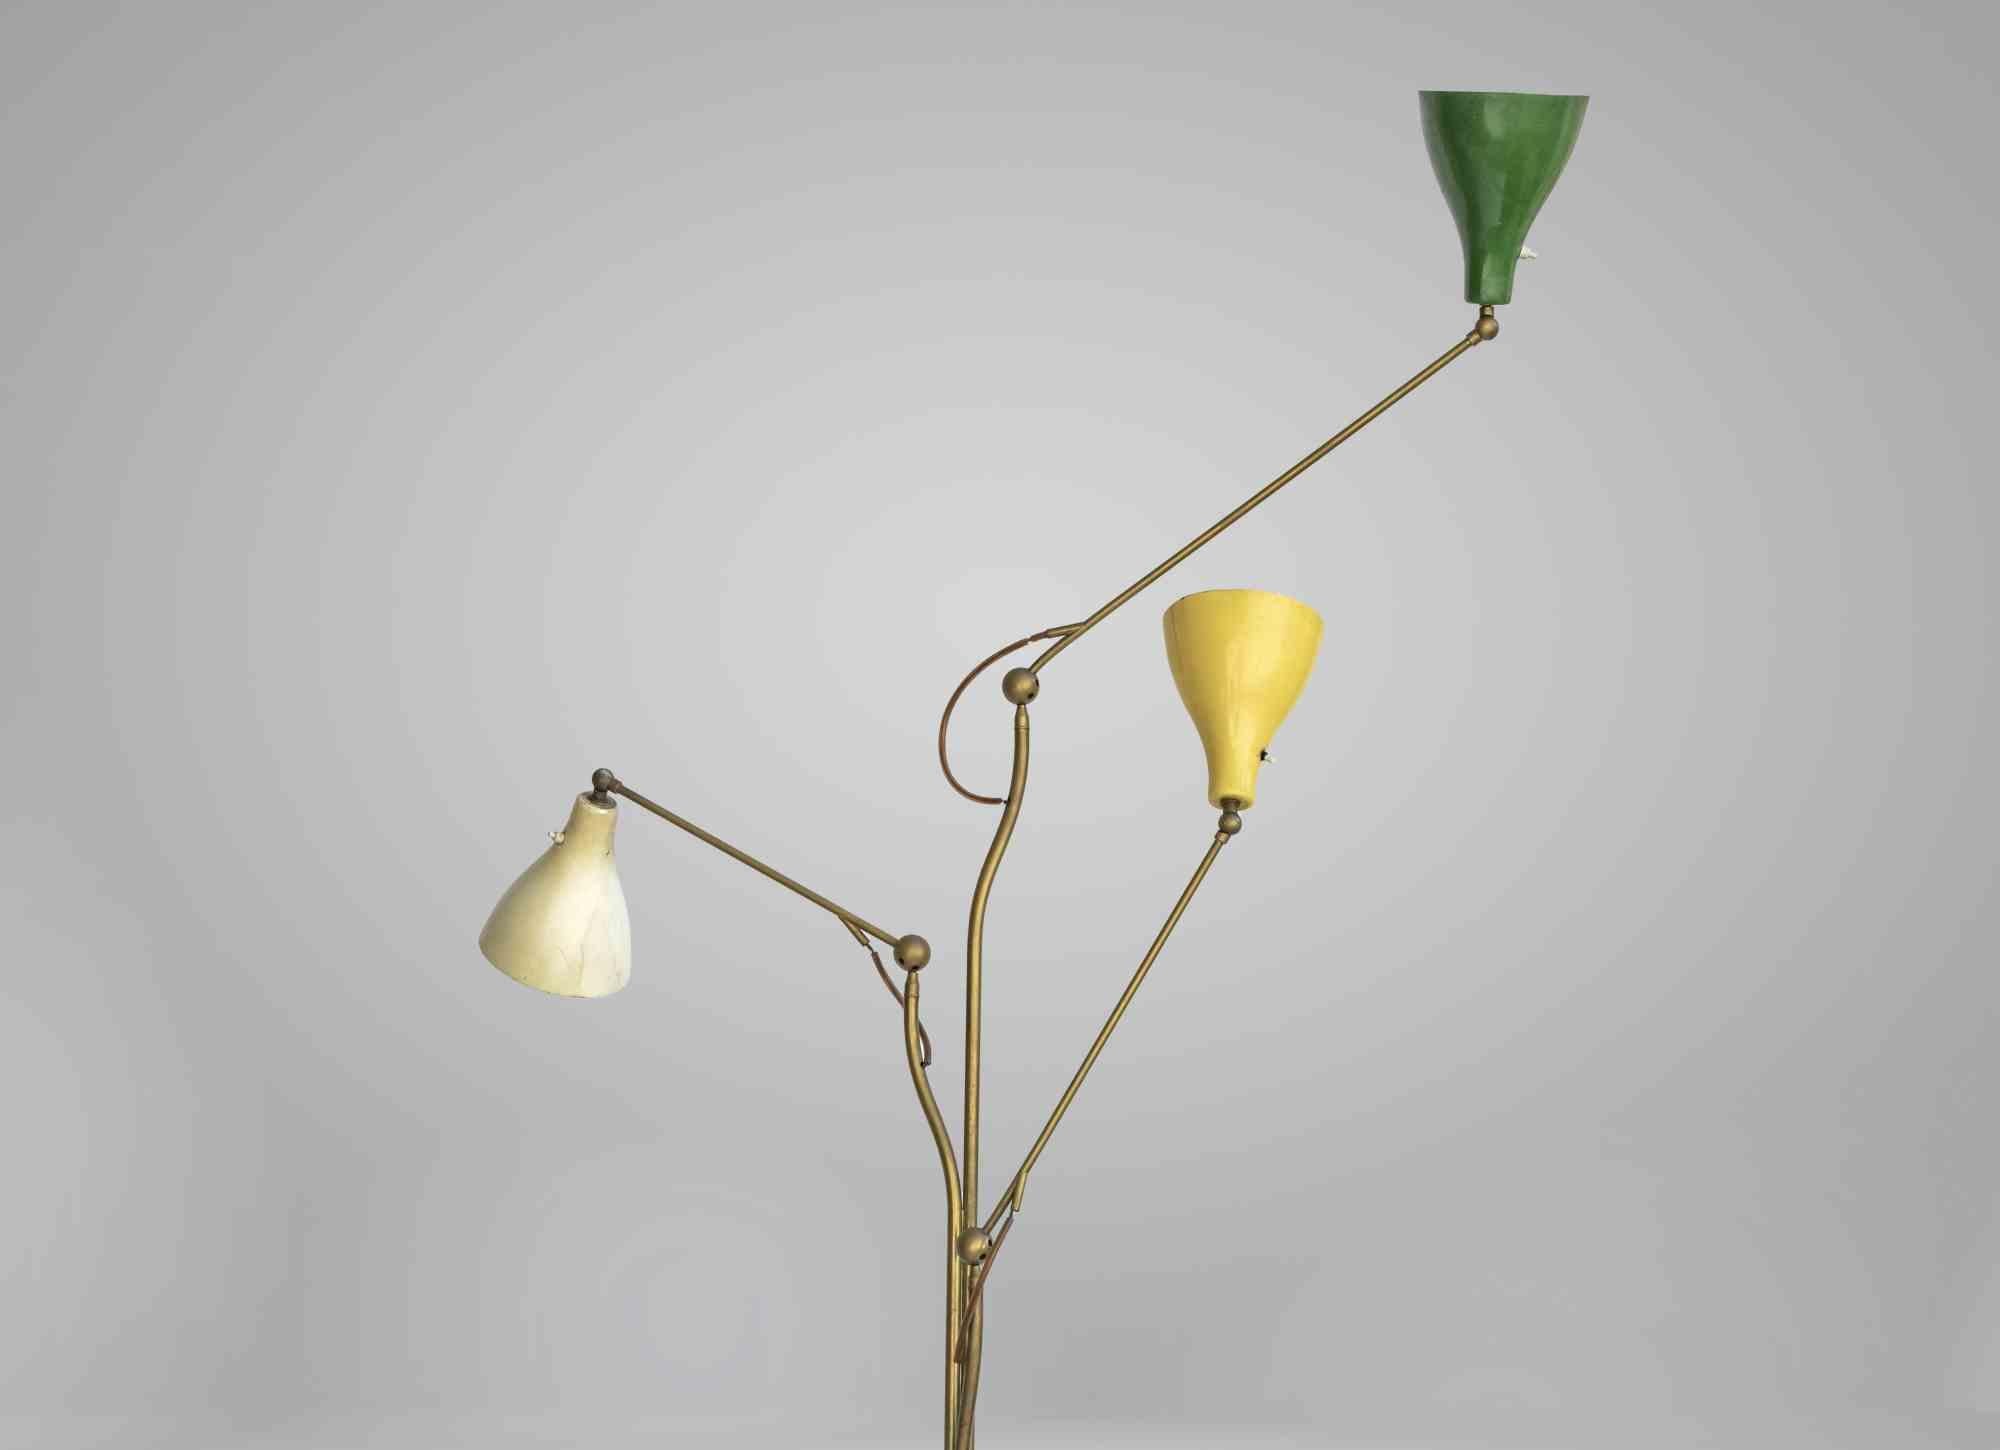 Top Rare floor lamp by Angelo Lelli for Arredoluce in 1949, beige lacquered metal base and brass, three adjustable arms with adjustable color lacquered shades in various colors. No replacements/restorations, very good and working condition.